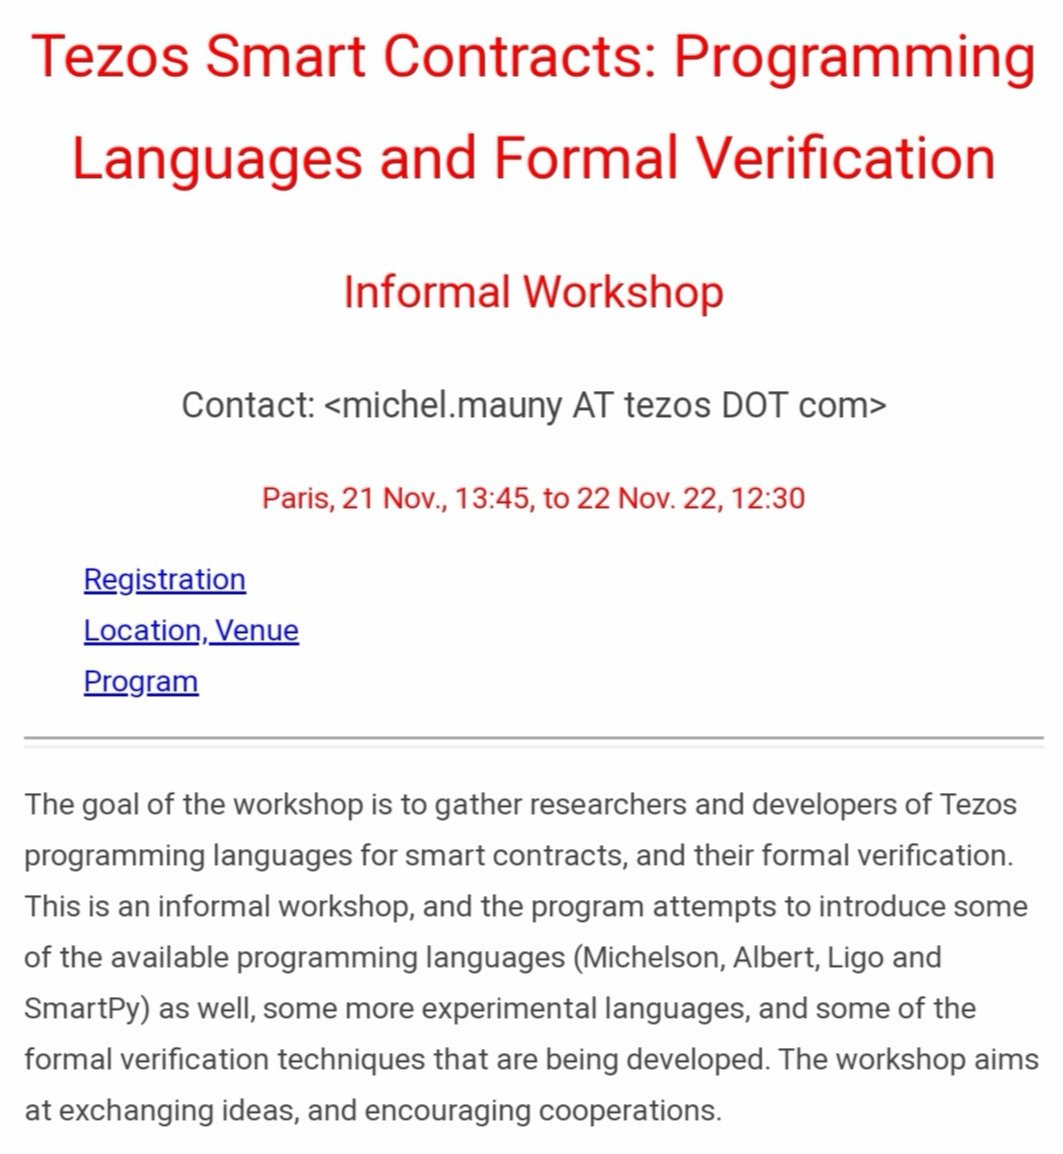 The Workshop on #Tezos #SmartContract languages and #FormalVerification will take place at University @ParisDiderot.
The event will start this Thursday at 13:30 CET.
We will share a live stream link for remote participants.